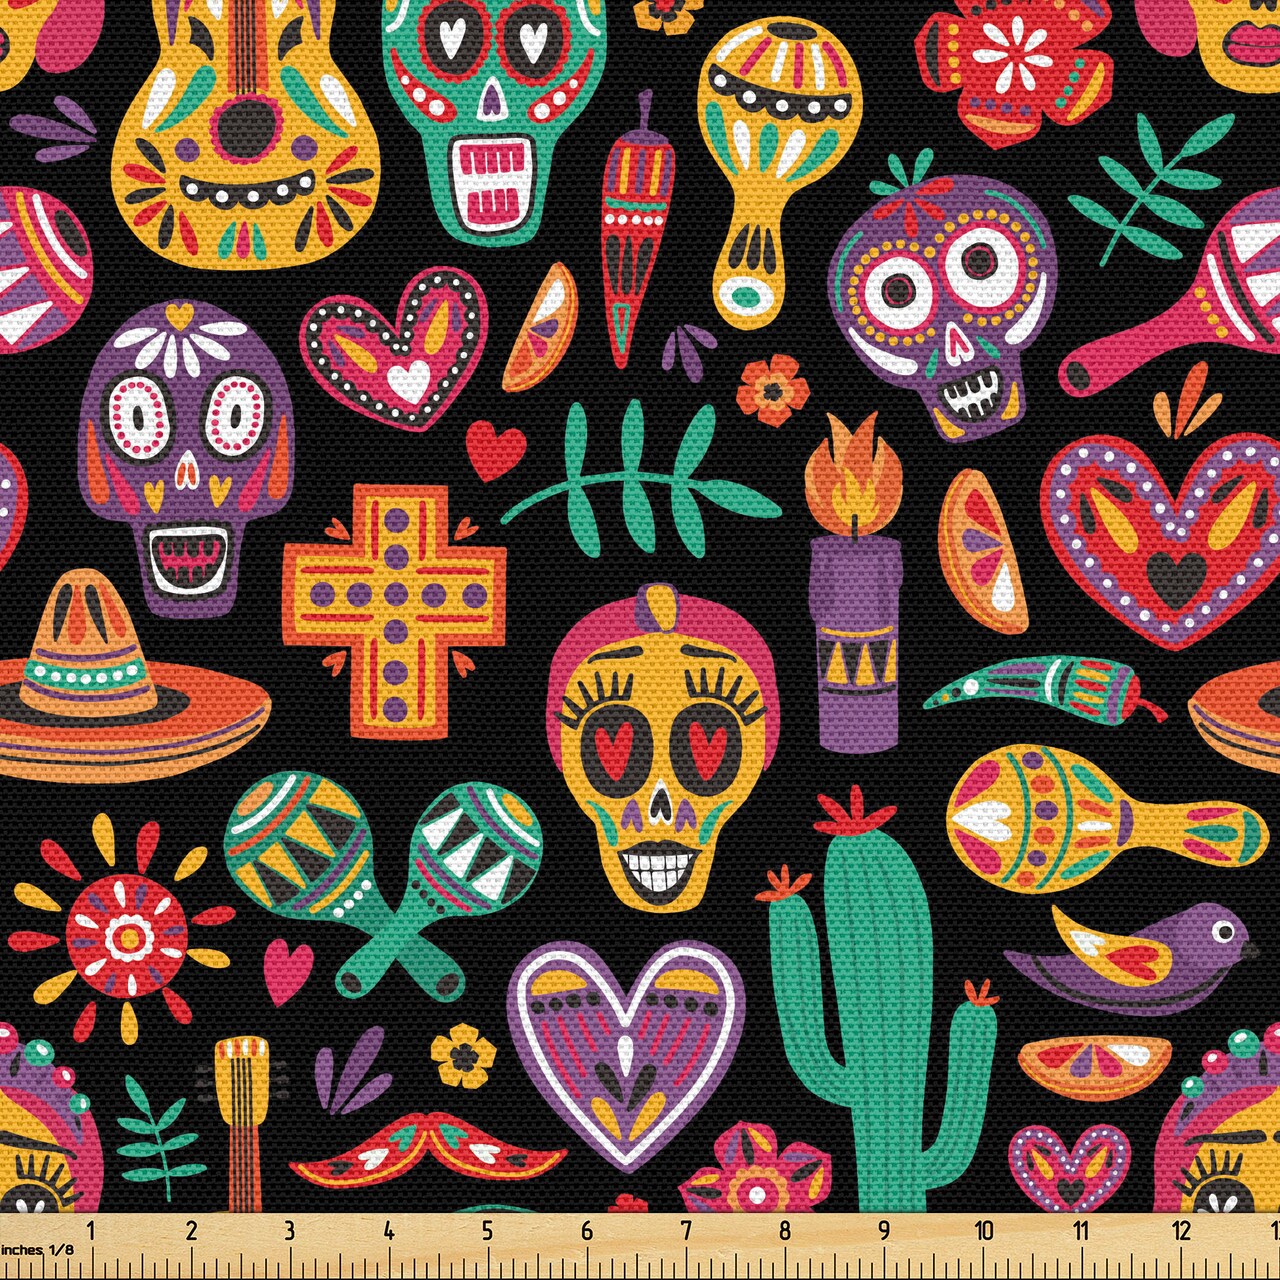 Ambesonne Day of the Dead Fabric by the Yard, Continuous Sugar Skull Flowers Pepper and Maracas Pattern, Decorative Fabric for Upholstery and Home Accents, 3 Yards, Charcoal Grey Multicolor